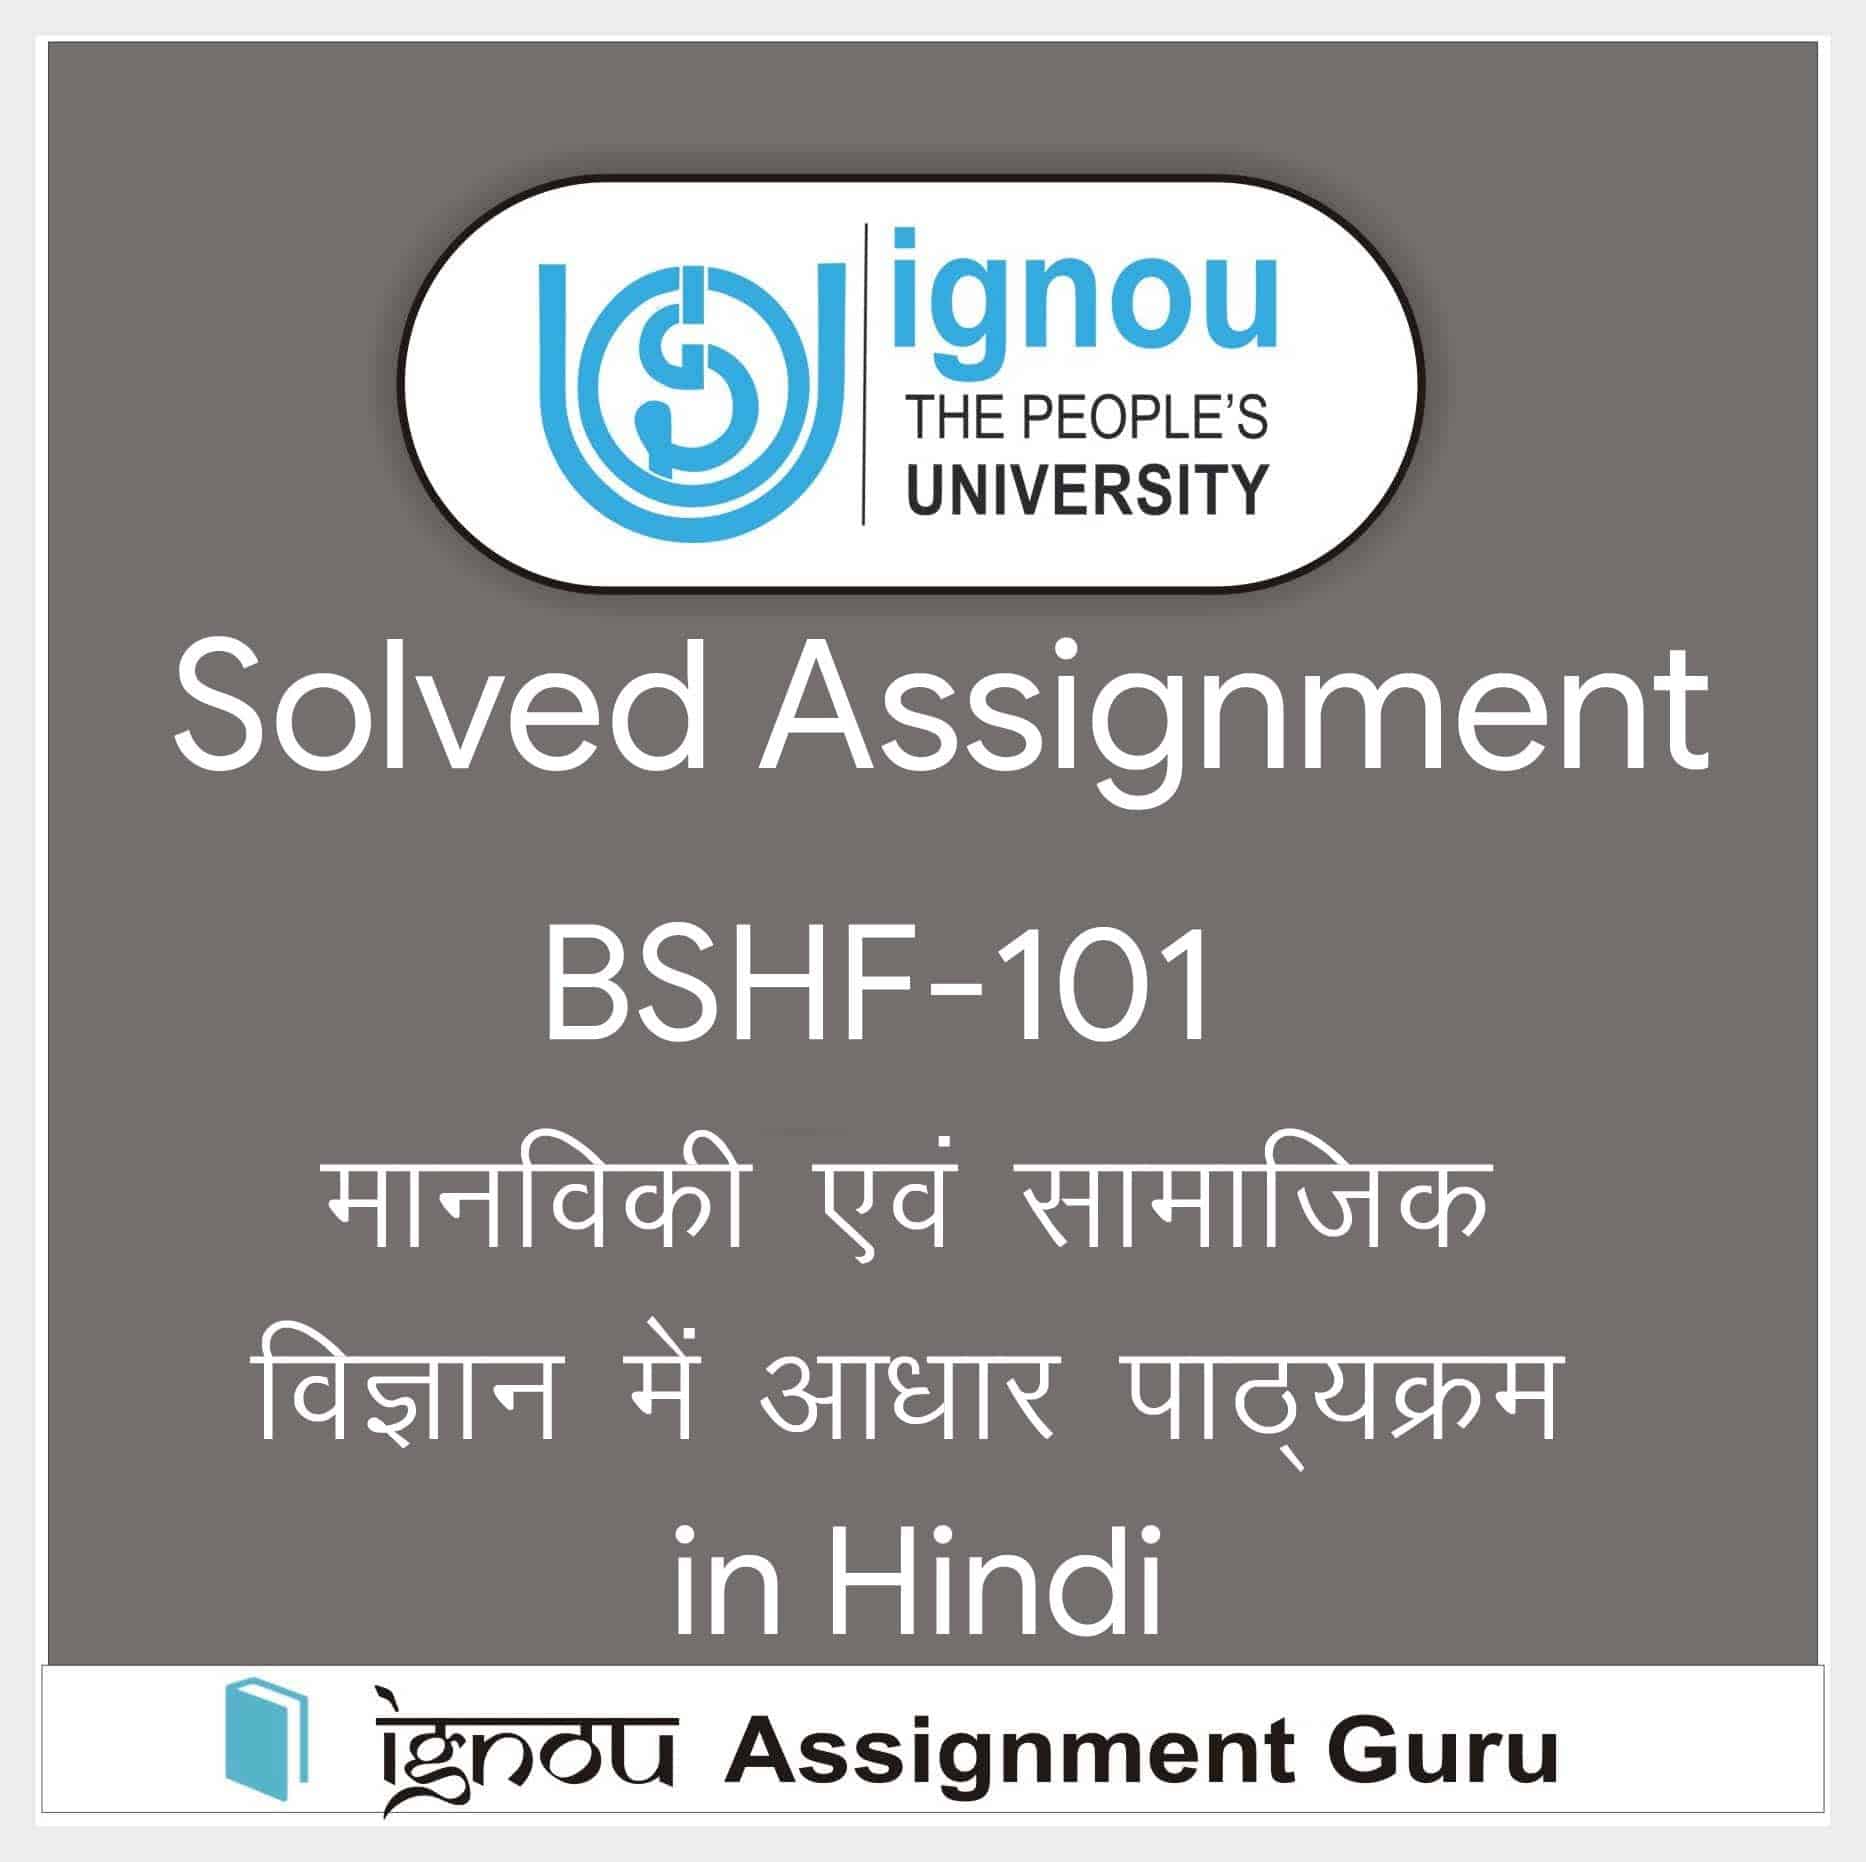 ignou assignment bshf 101 in hindi